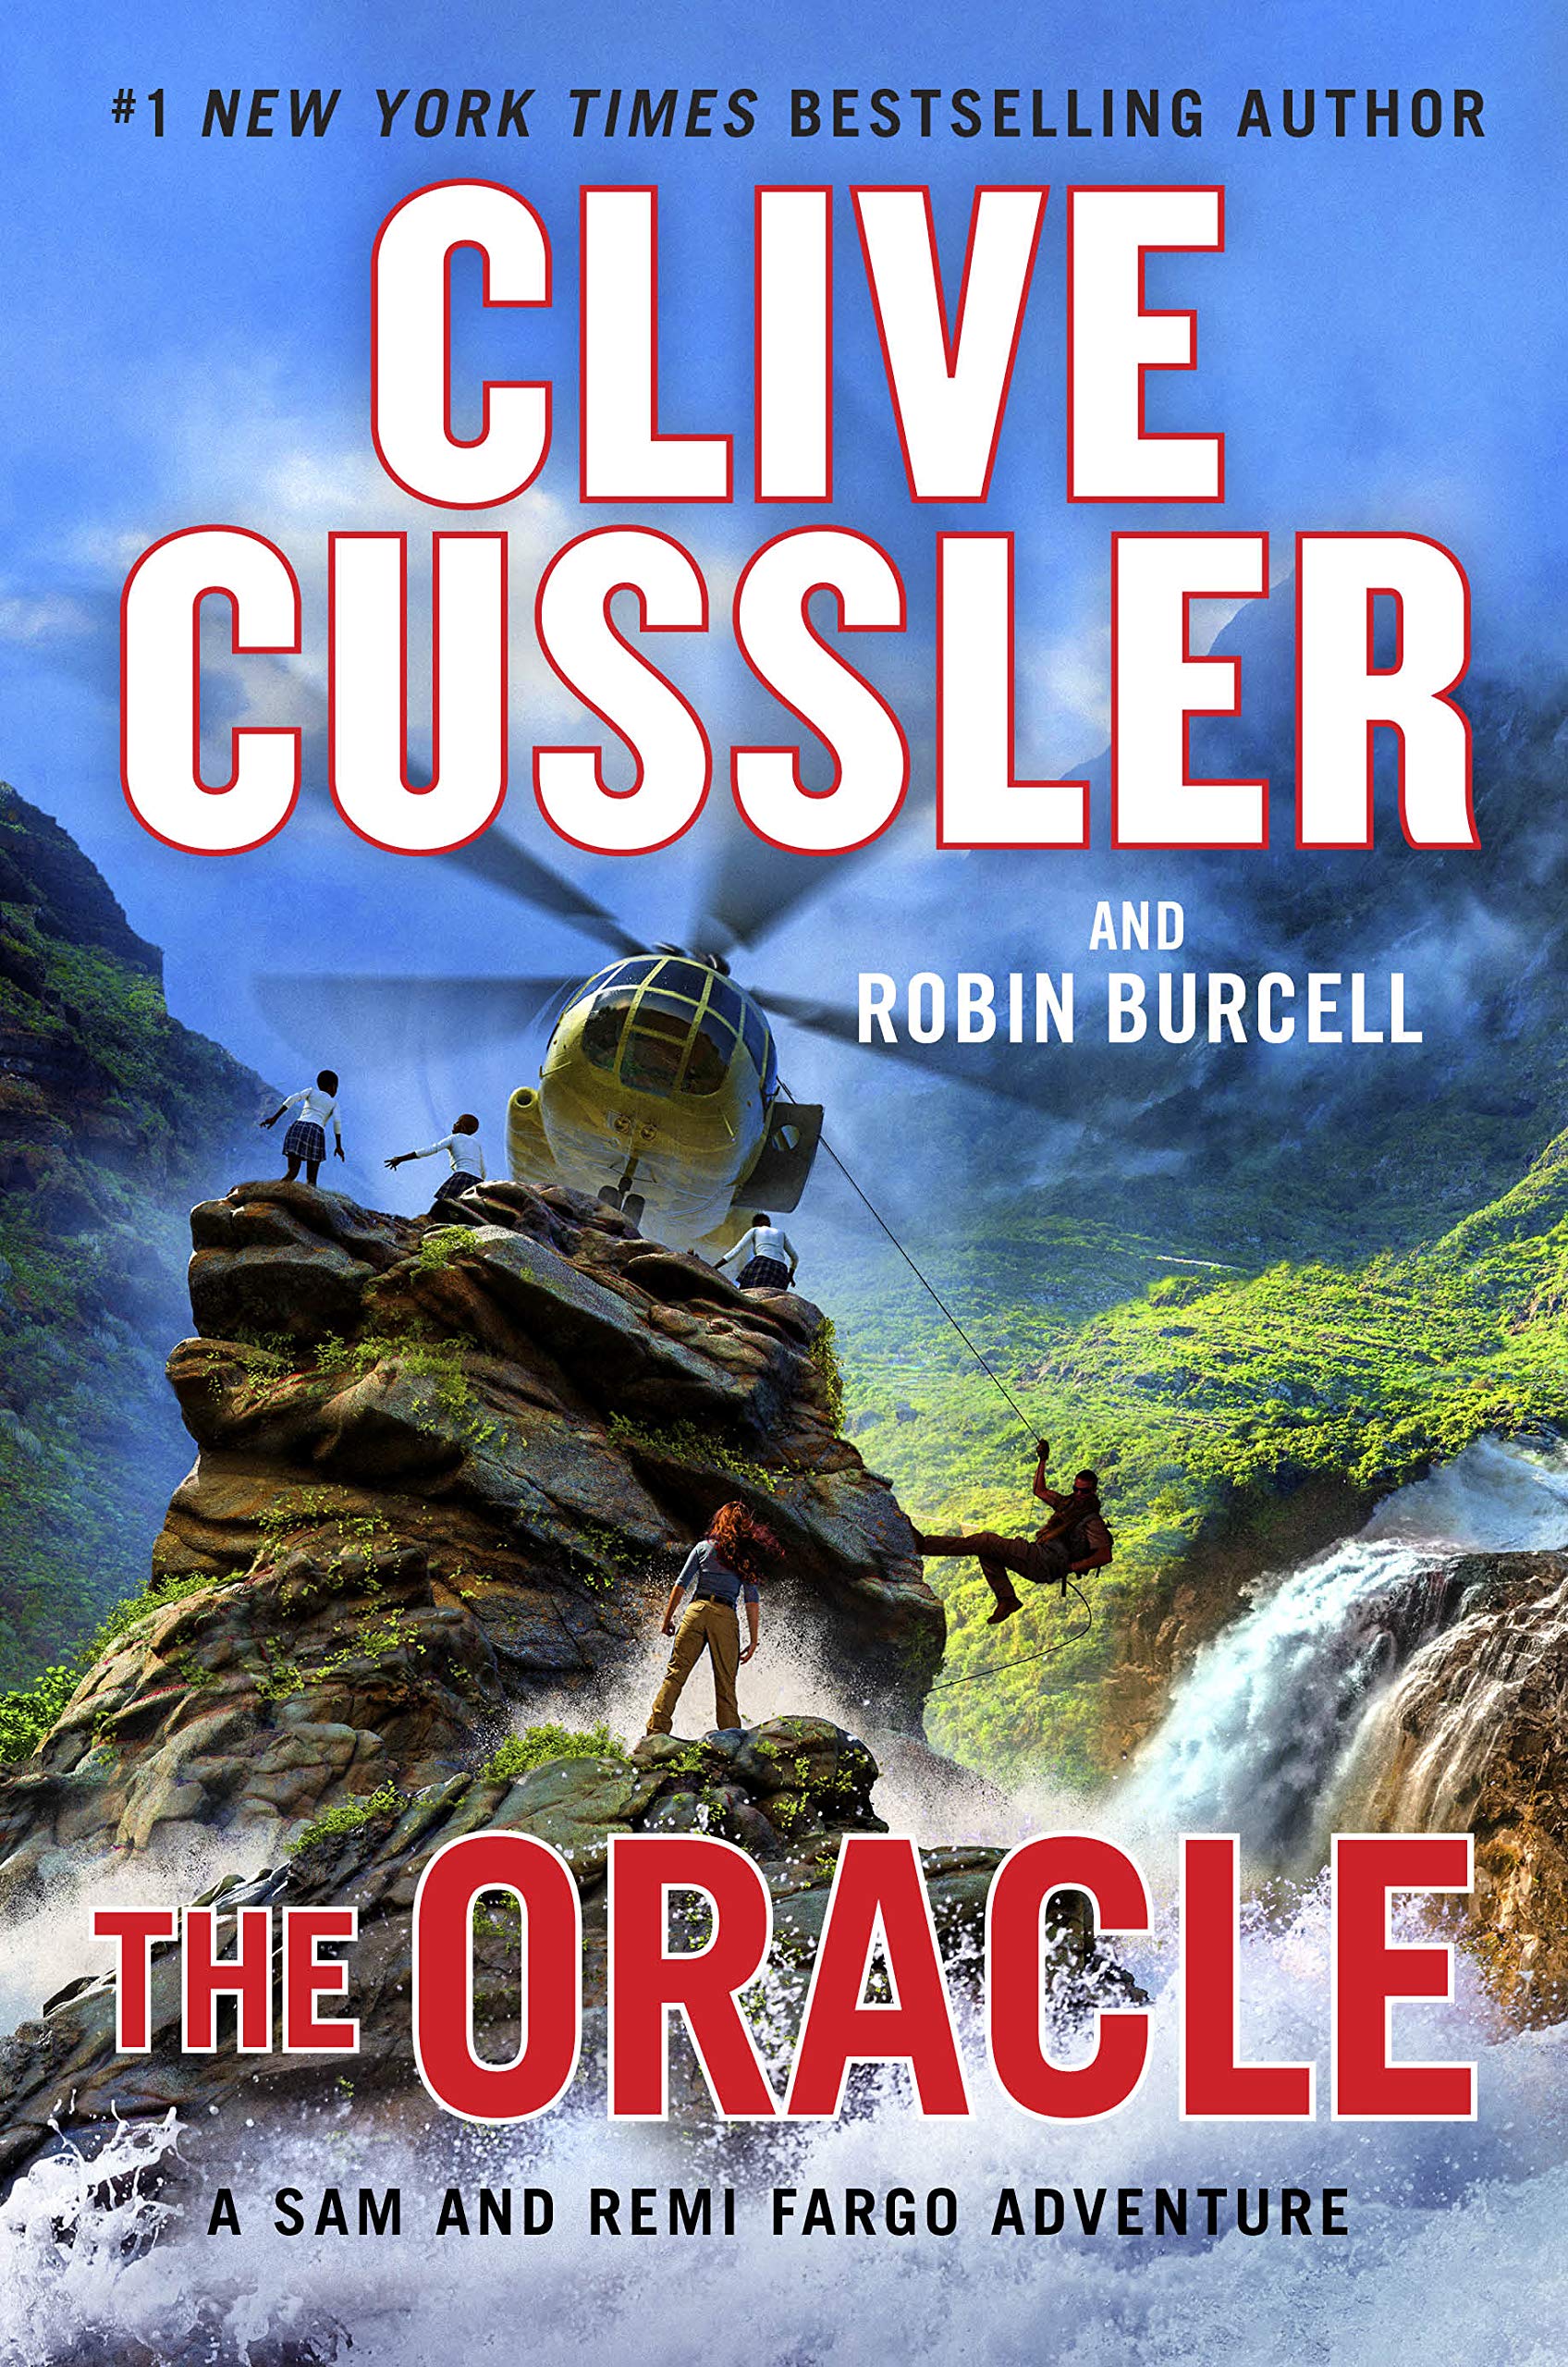 The Oracle (A Sam and Remi Fargo Adventure Book 11)